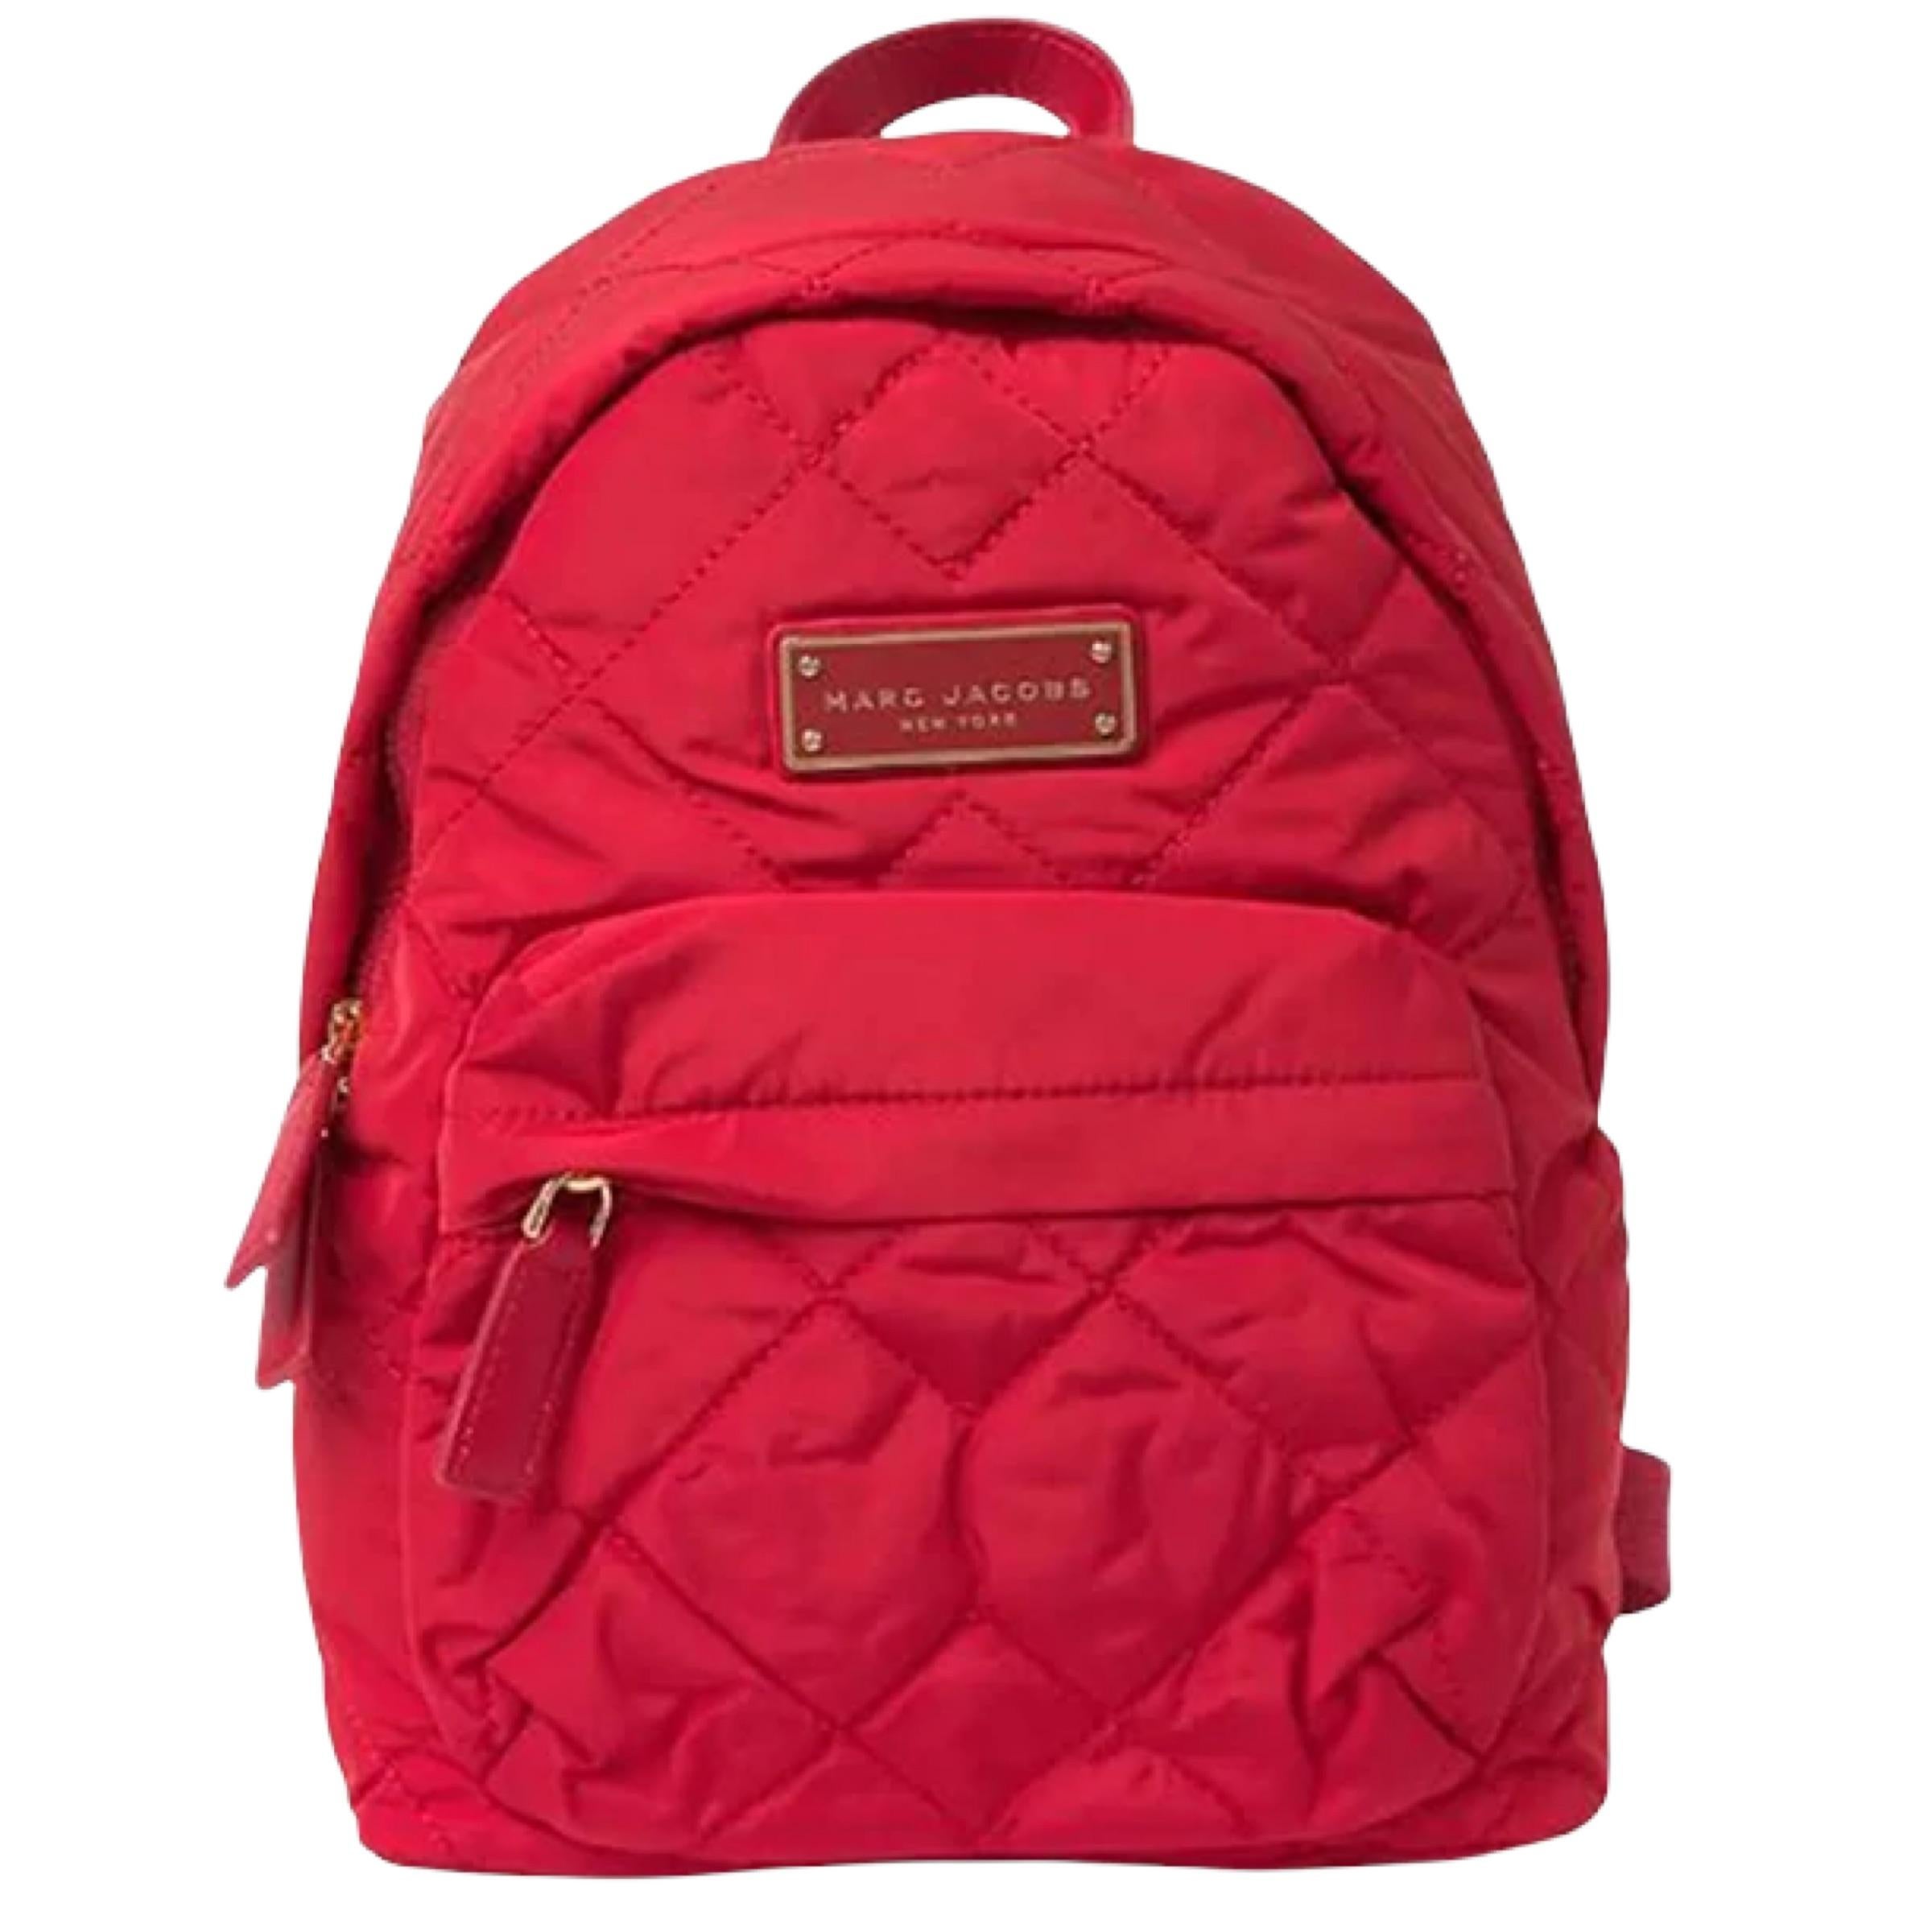 New Marc Jacobs Red Quilted Nylon Mini Backpack Rucksack Bag

Authenticity Guaranteed

DETAILS
Brand: Marc Jacobs
Gender: Unisex
Category: Backpack
Condition: Brand new
Color: Red
Material: Nylon
Quilted leather with front logo plaque
Top